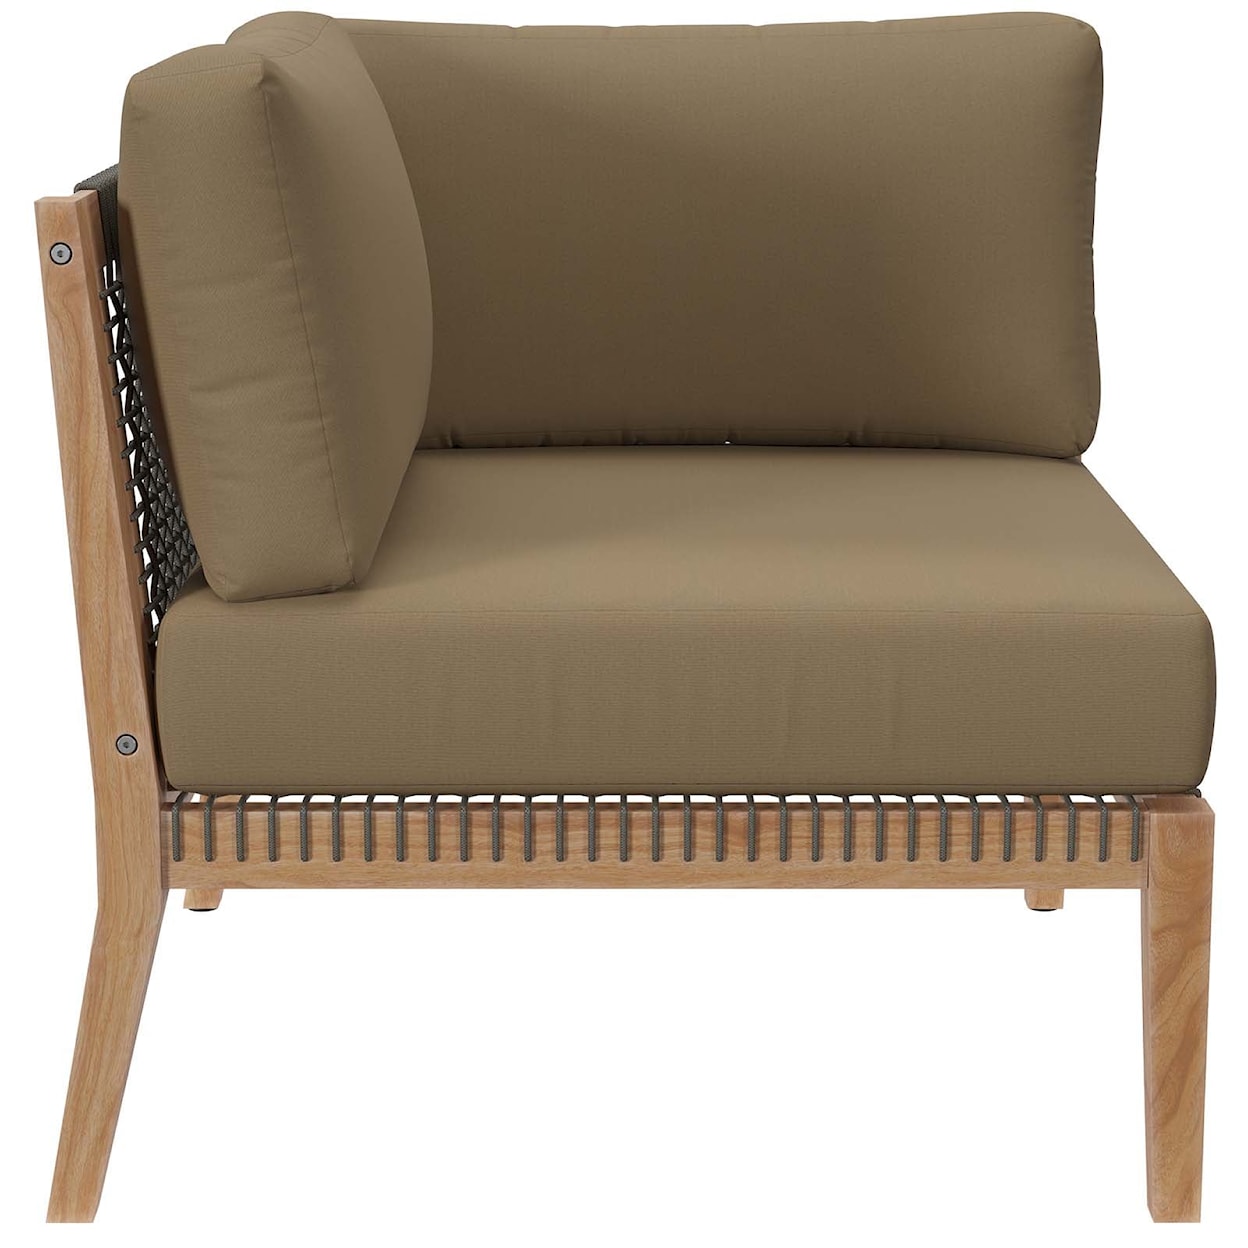 Modway Clearwater Outdoor Patio Corner Chair